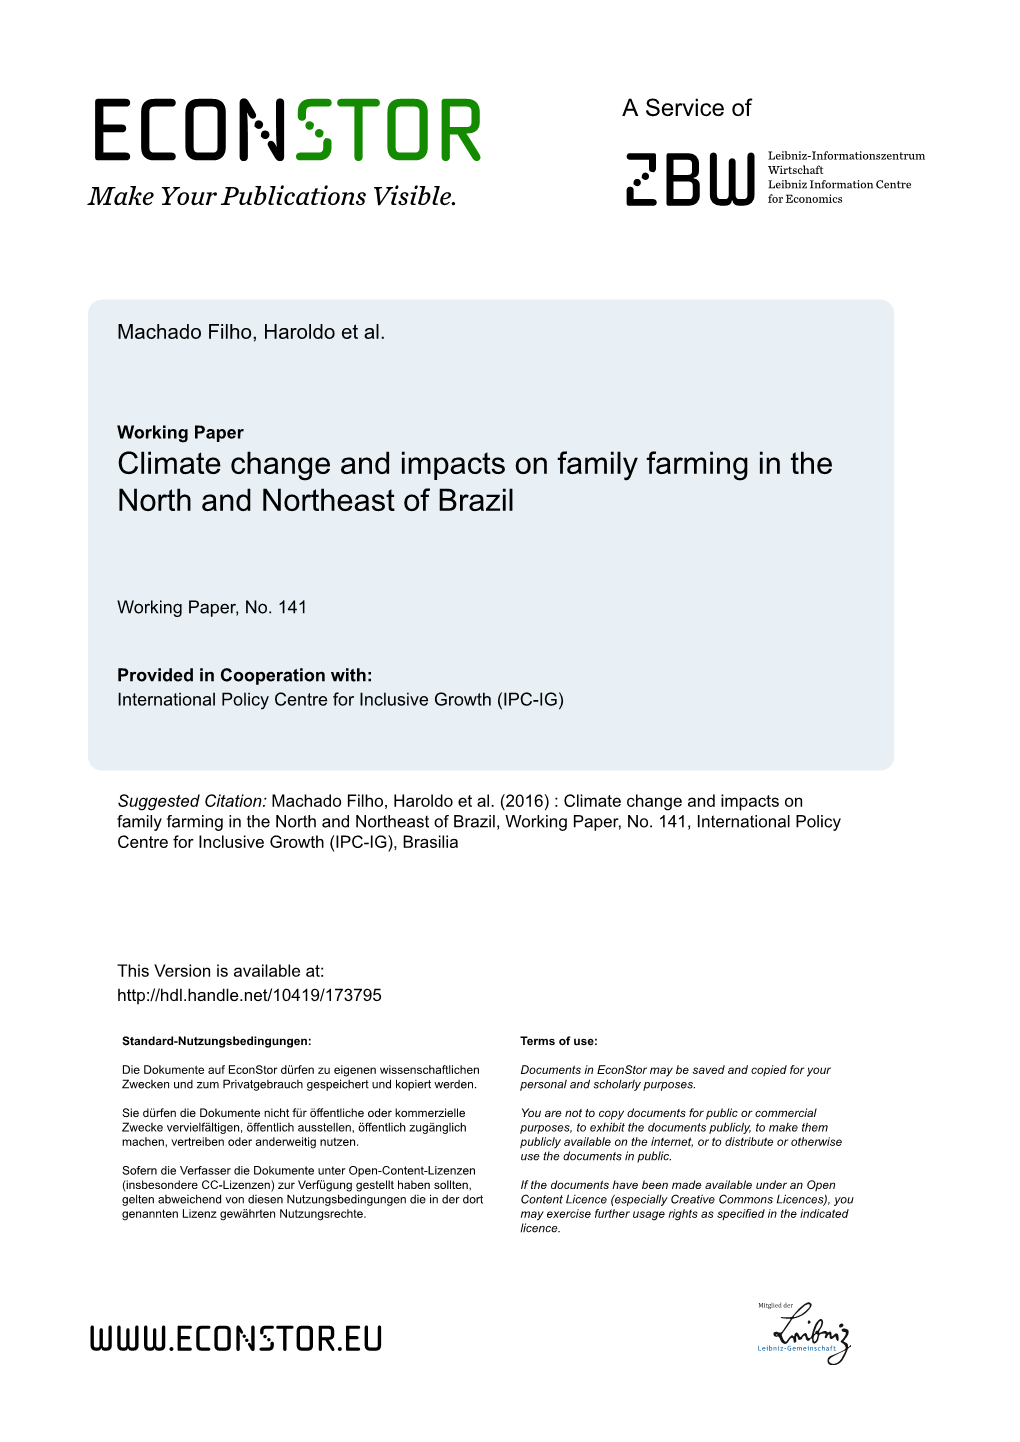 Climate Change and Impacts on Family Farming in the North and Northeast of Brazil